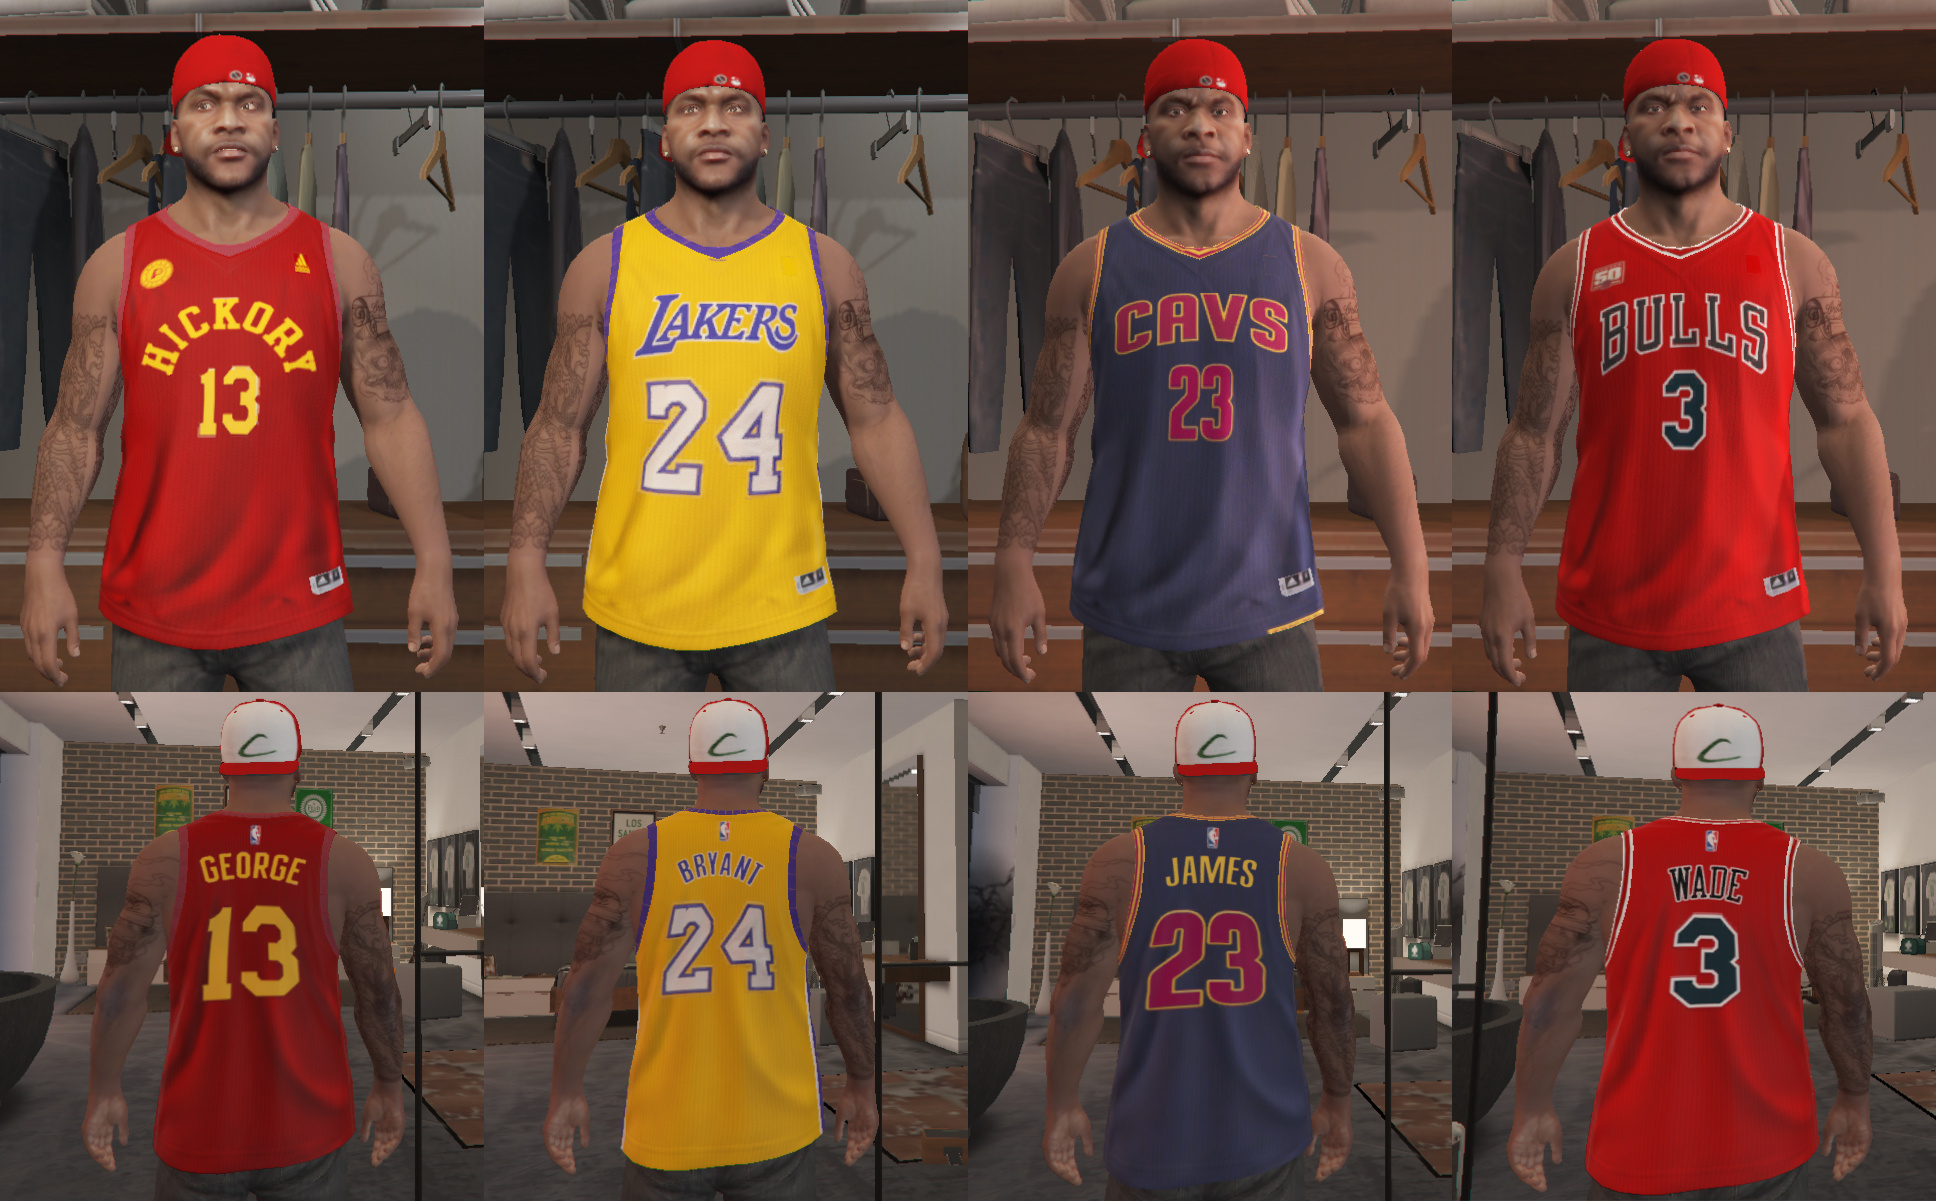 Is there a Sims 4 CC equivalent to this GTA V basketball jersey +